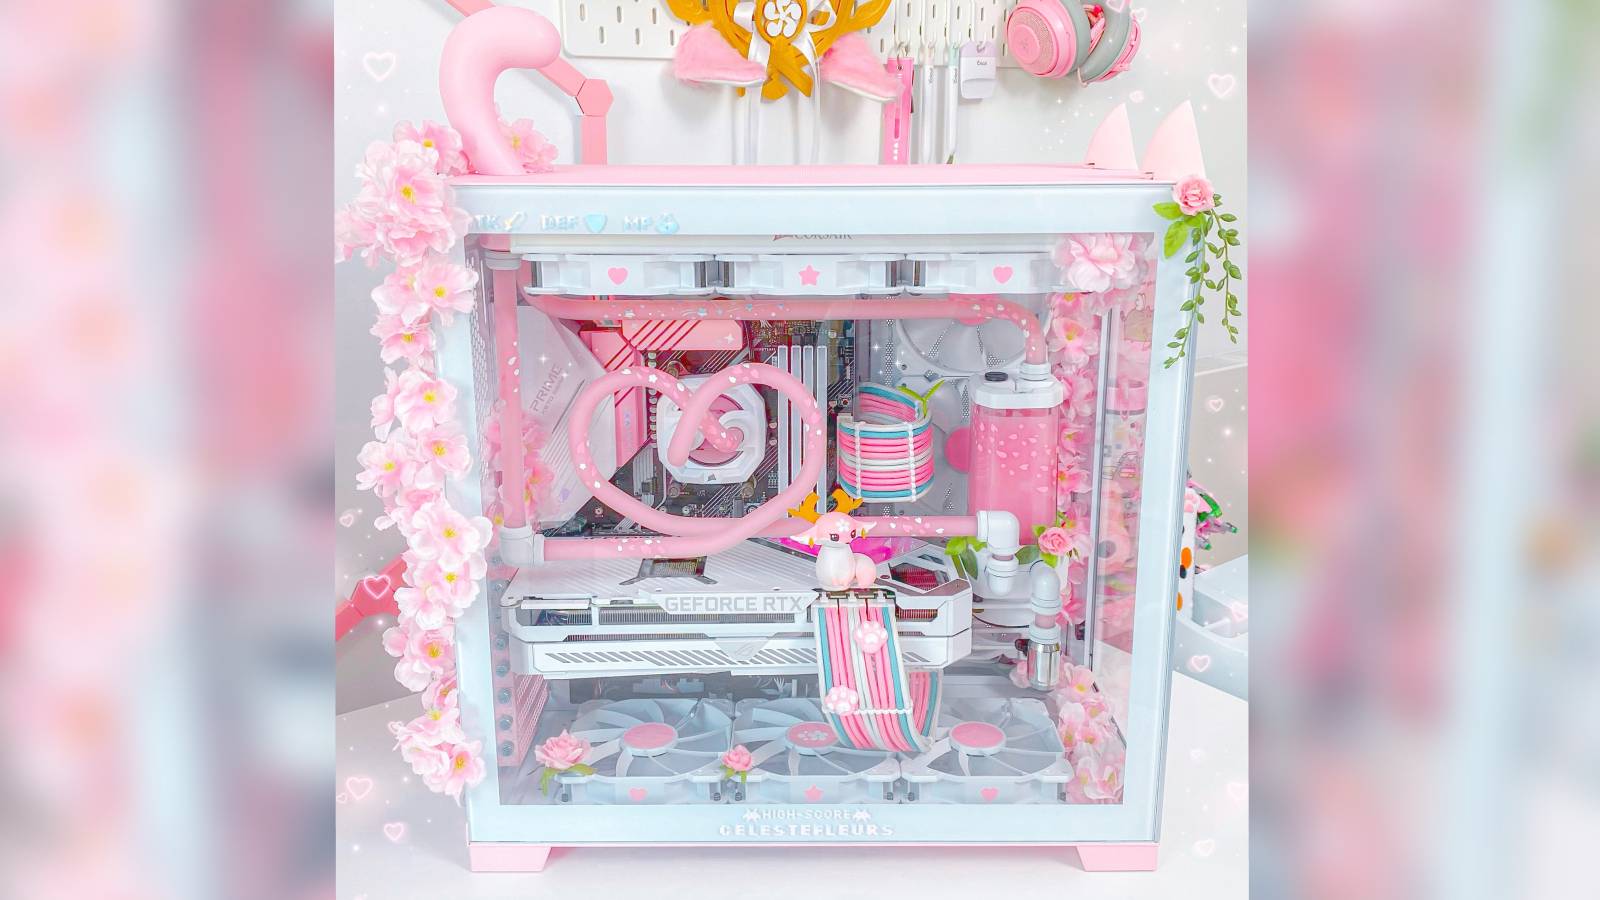 A cute PC build by celestefleurs, as posted on their X/Twitter account.